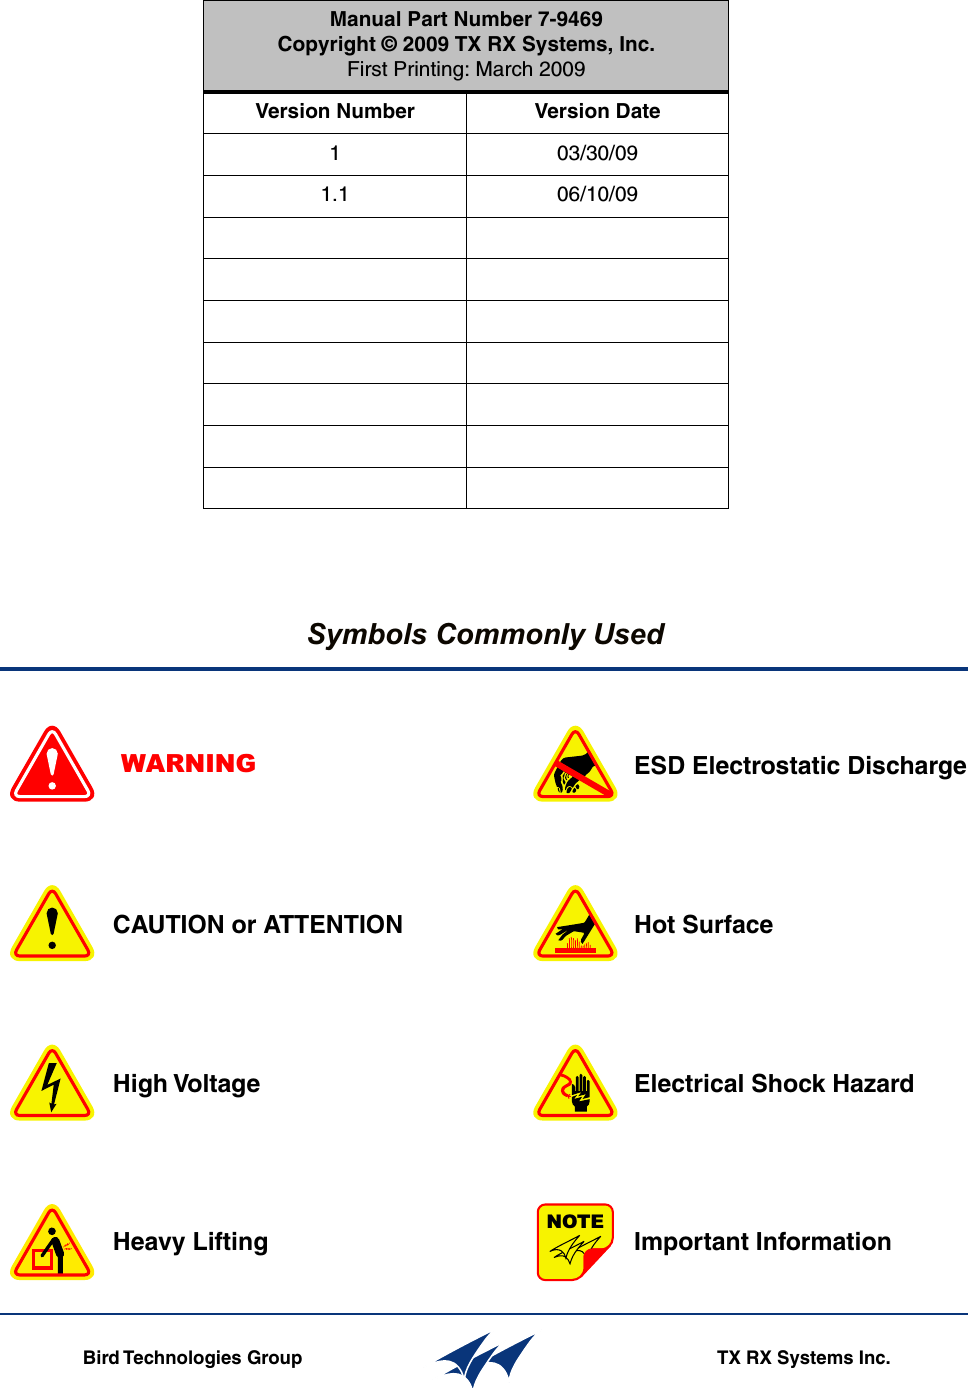 Symbols Commonly UsedWARNING                ESD Electrostatic DischargeHot SurfaceElectrical Shock HazardImportant InformationCAUTION or ATTENTIONHigh VoltageHeavy LiftingBird Technologies Group TX RX Systems Inc.NOTEManual Part Number 7-9469Copyright © 2009 TX RX Systems, Inc.First Printing: March 2009Version Number Version Date1 03/30/091.1 06/10/09